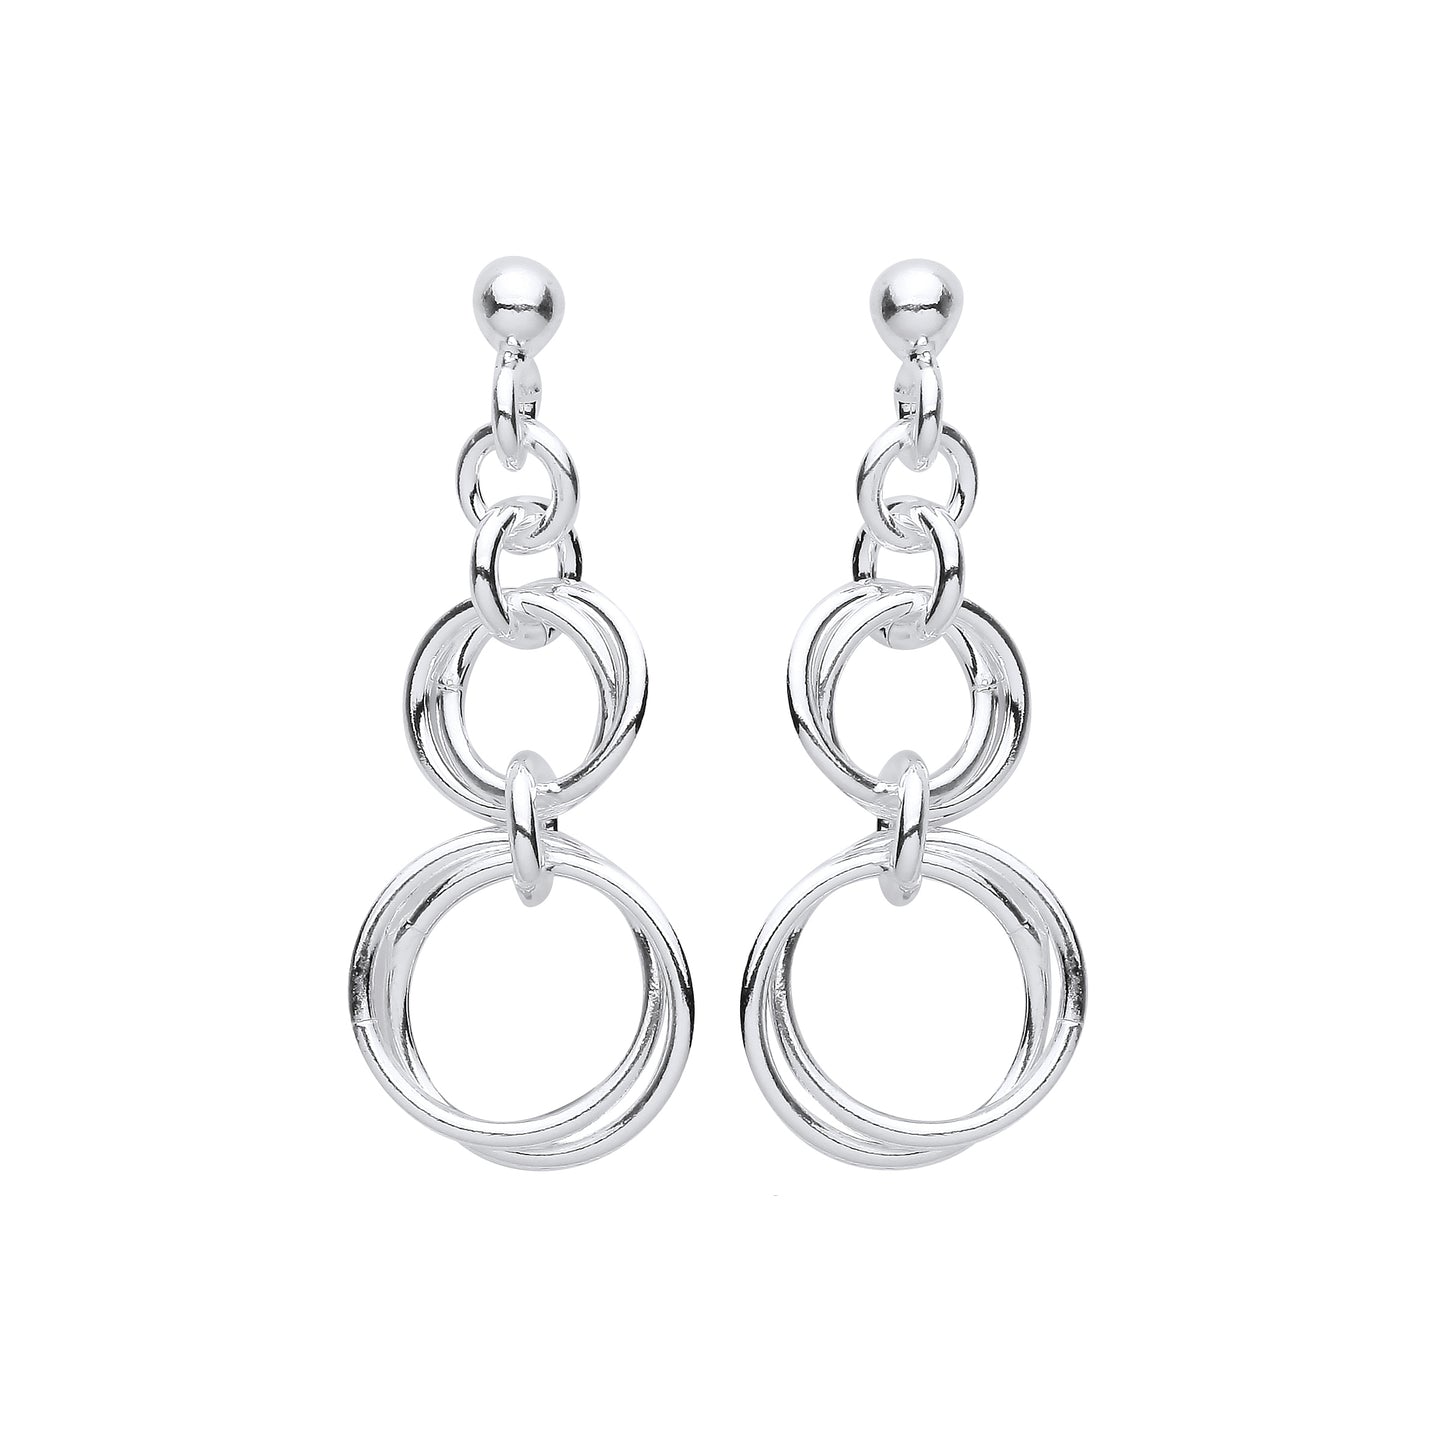 Silver  Graduated Chinese Magic Linked Rings Drop Earrings - EAG1149